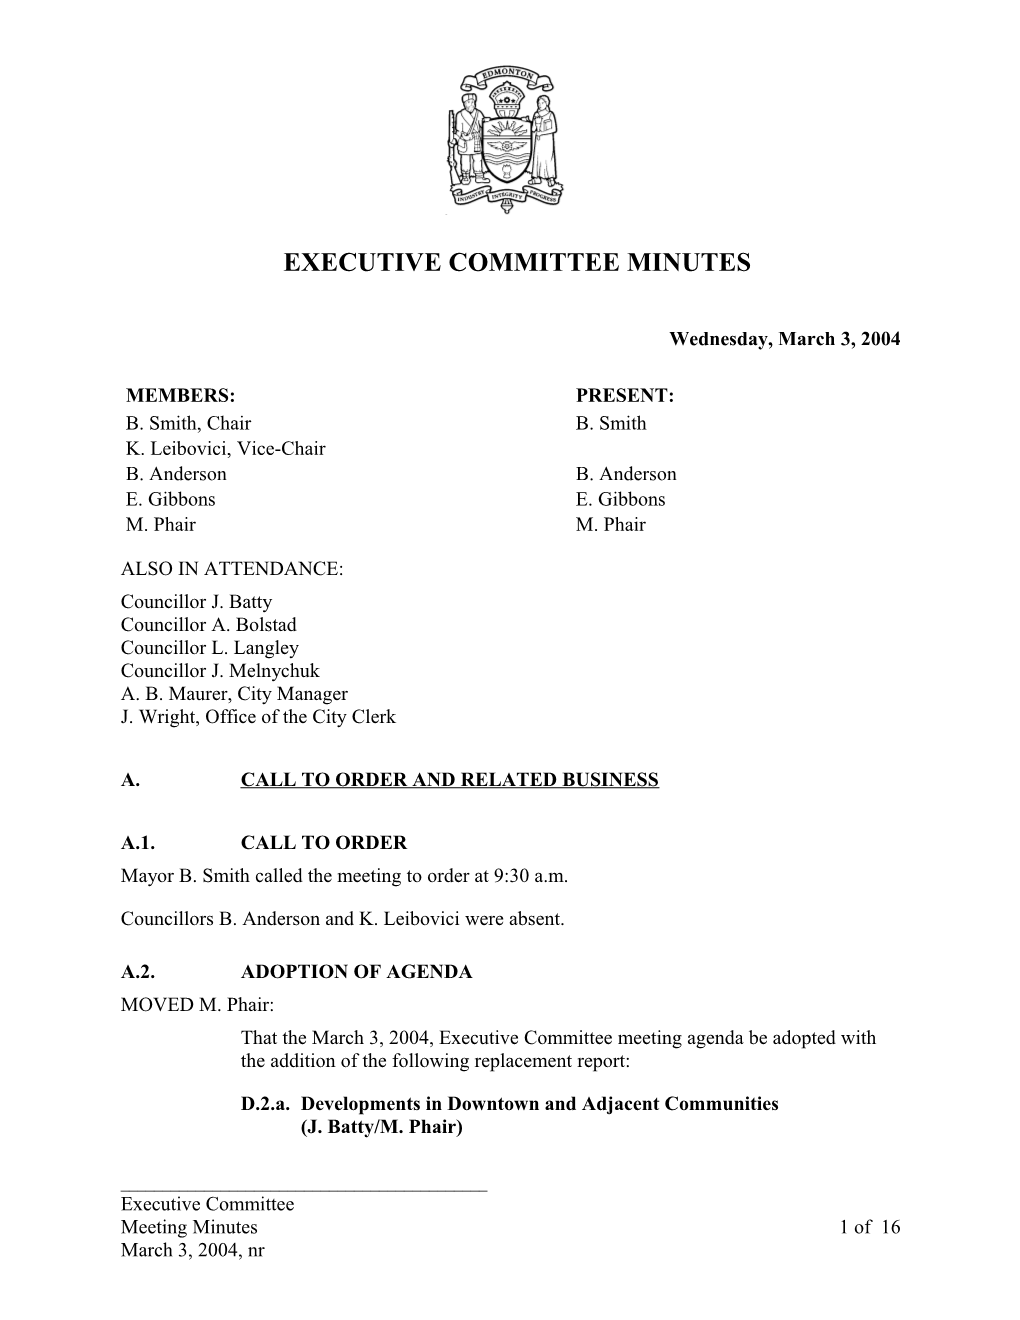 Minutes for Executive Committee March 3, 2004 Meeting